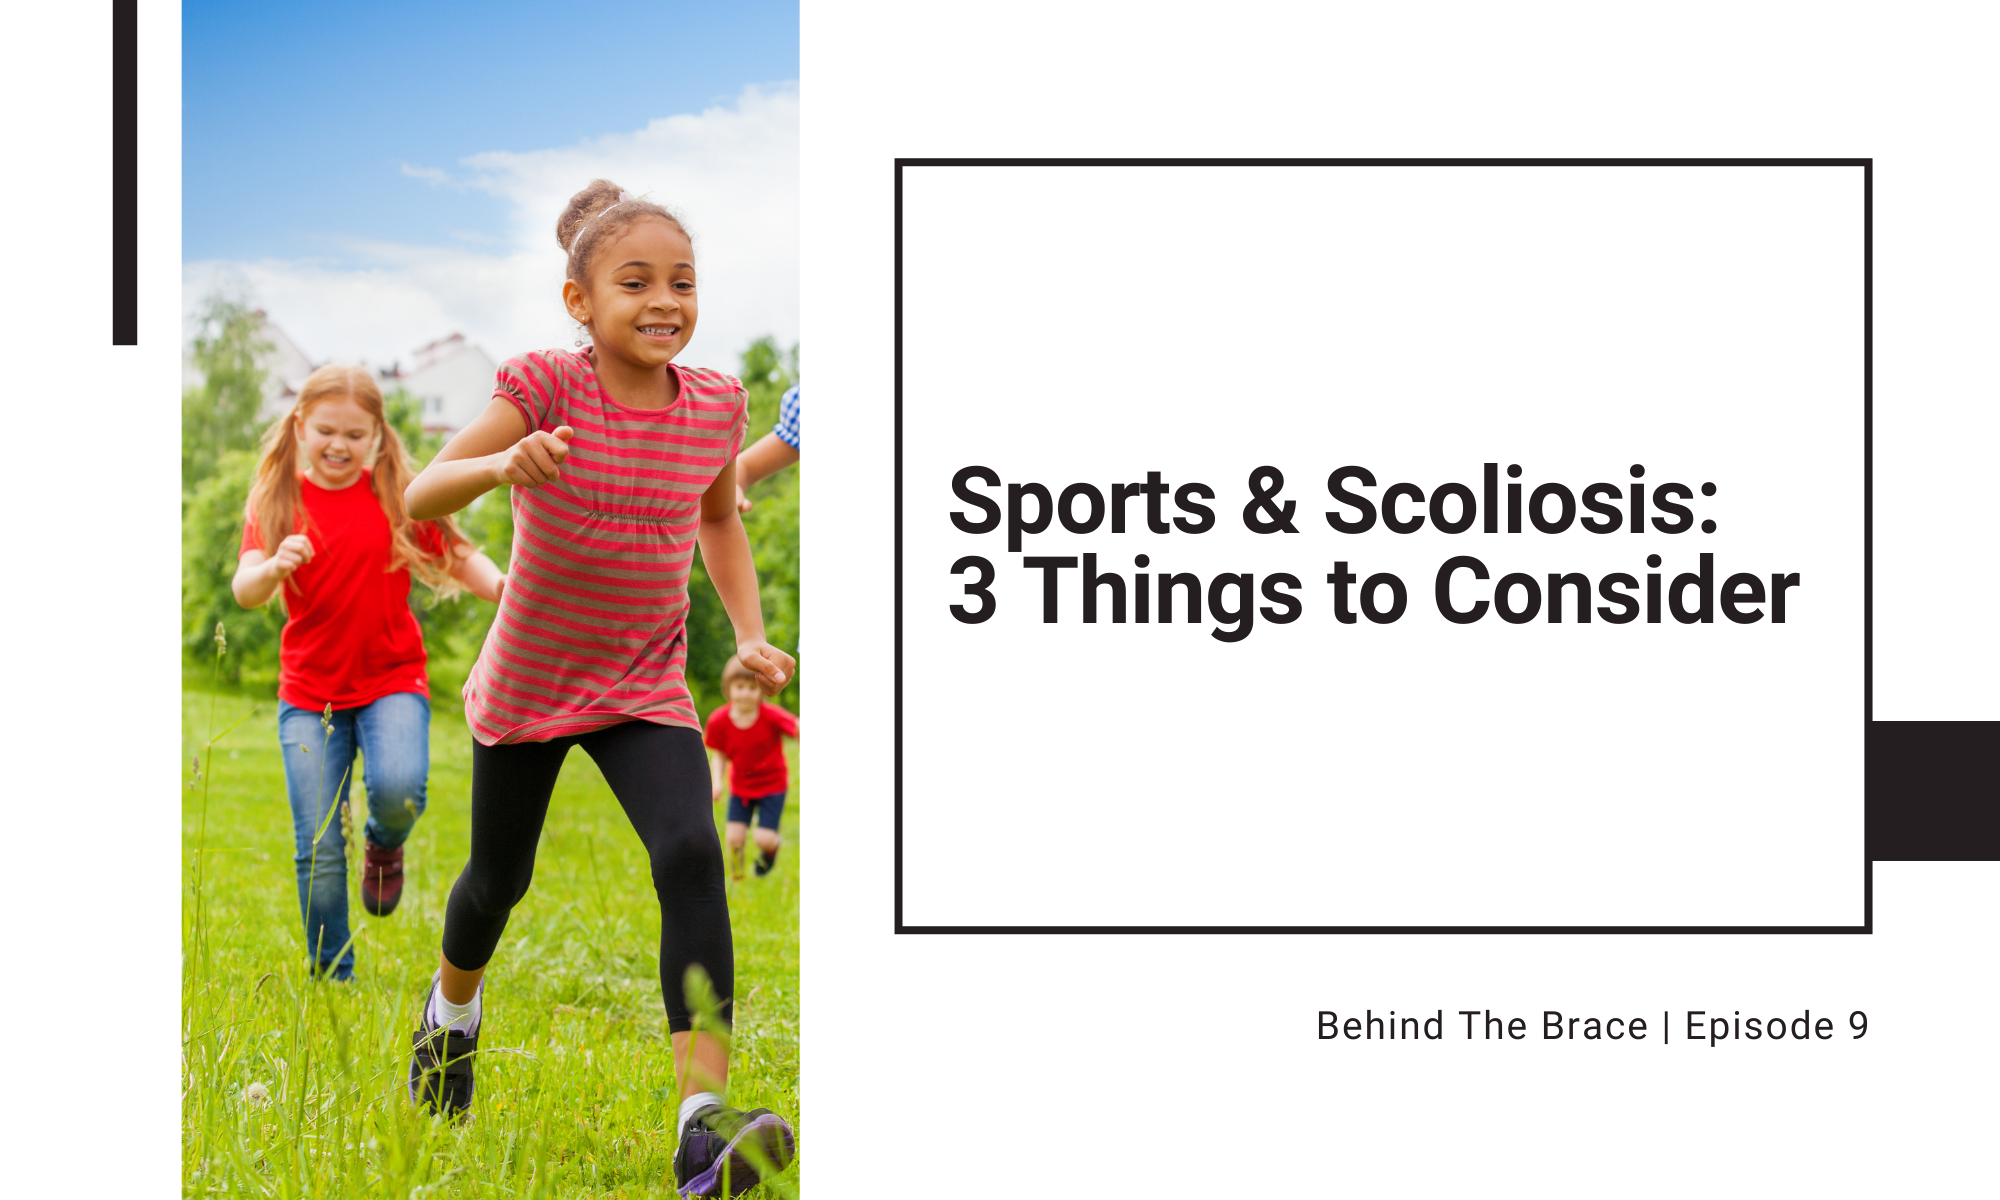 Sports & Scoliosis: 3 Things to Consider